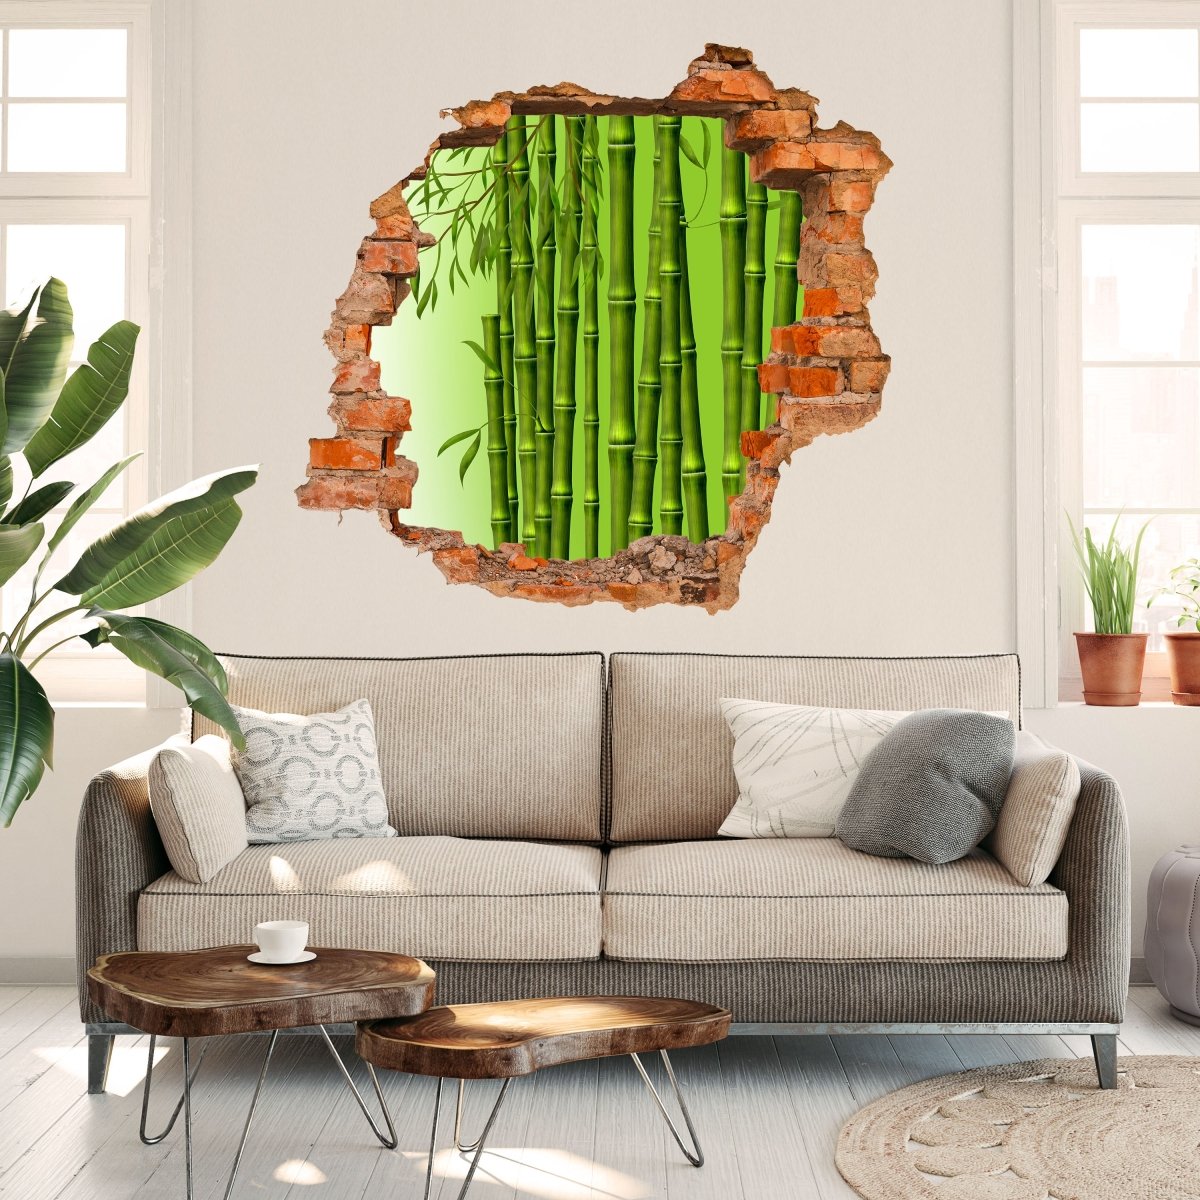 Bamboo branches 3D wall sticker - Wall Decal M0461